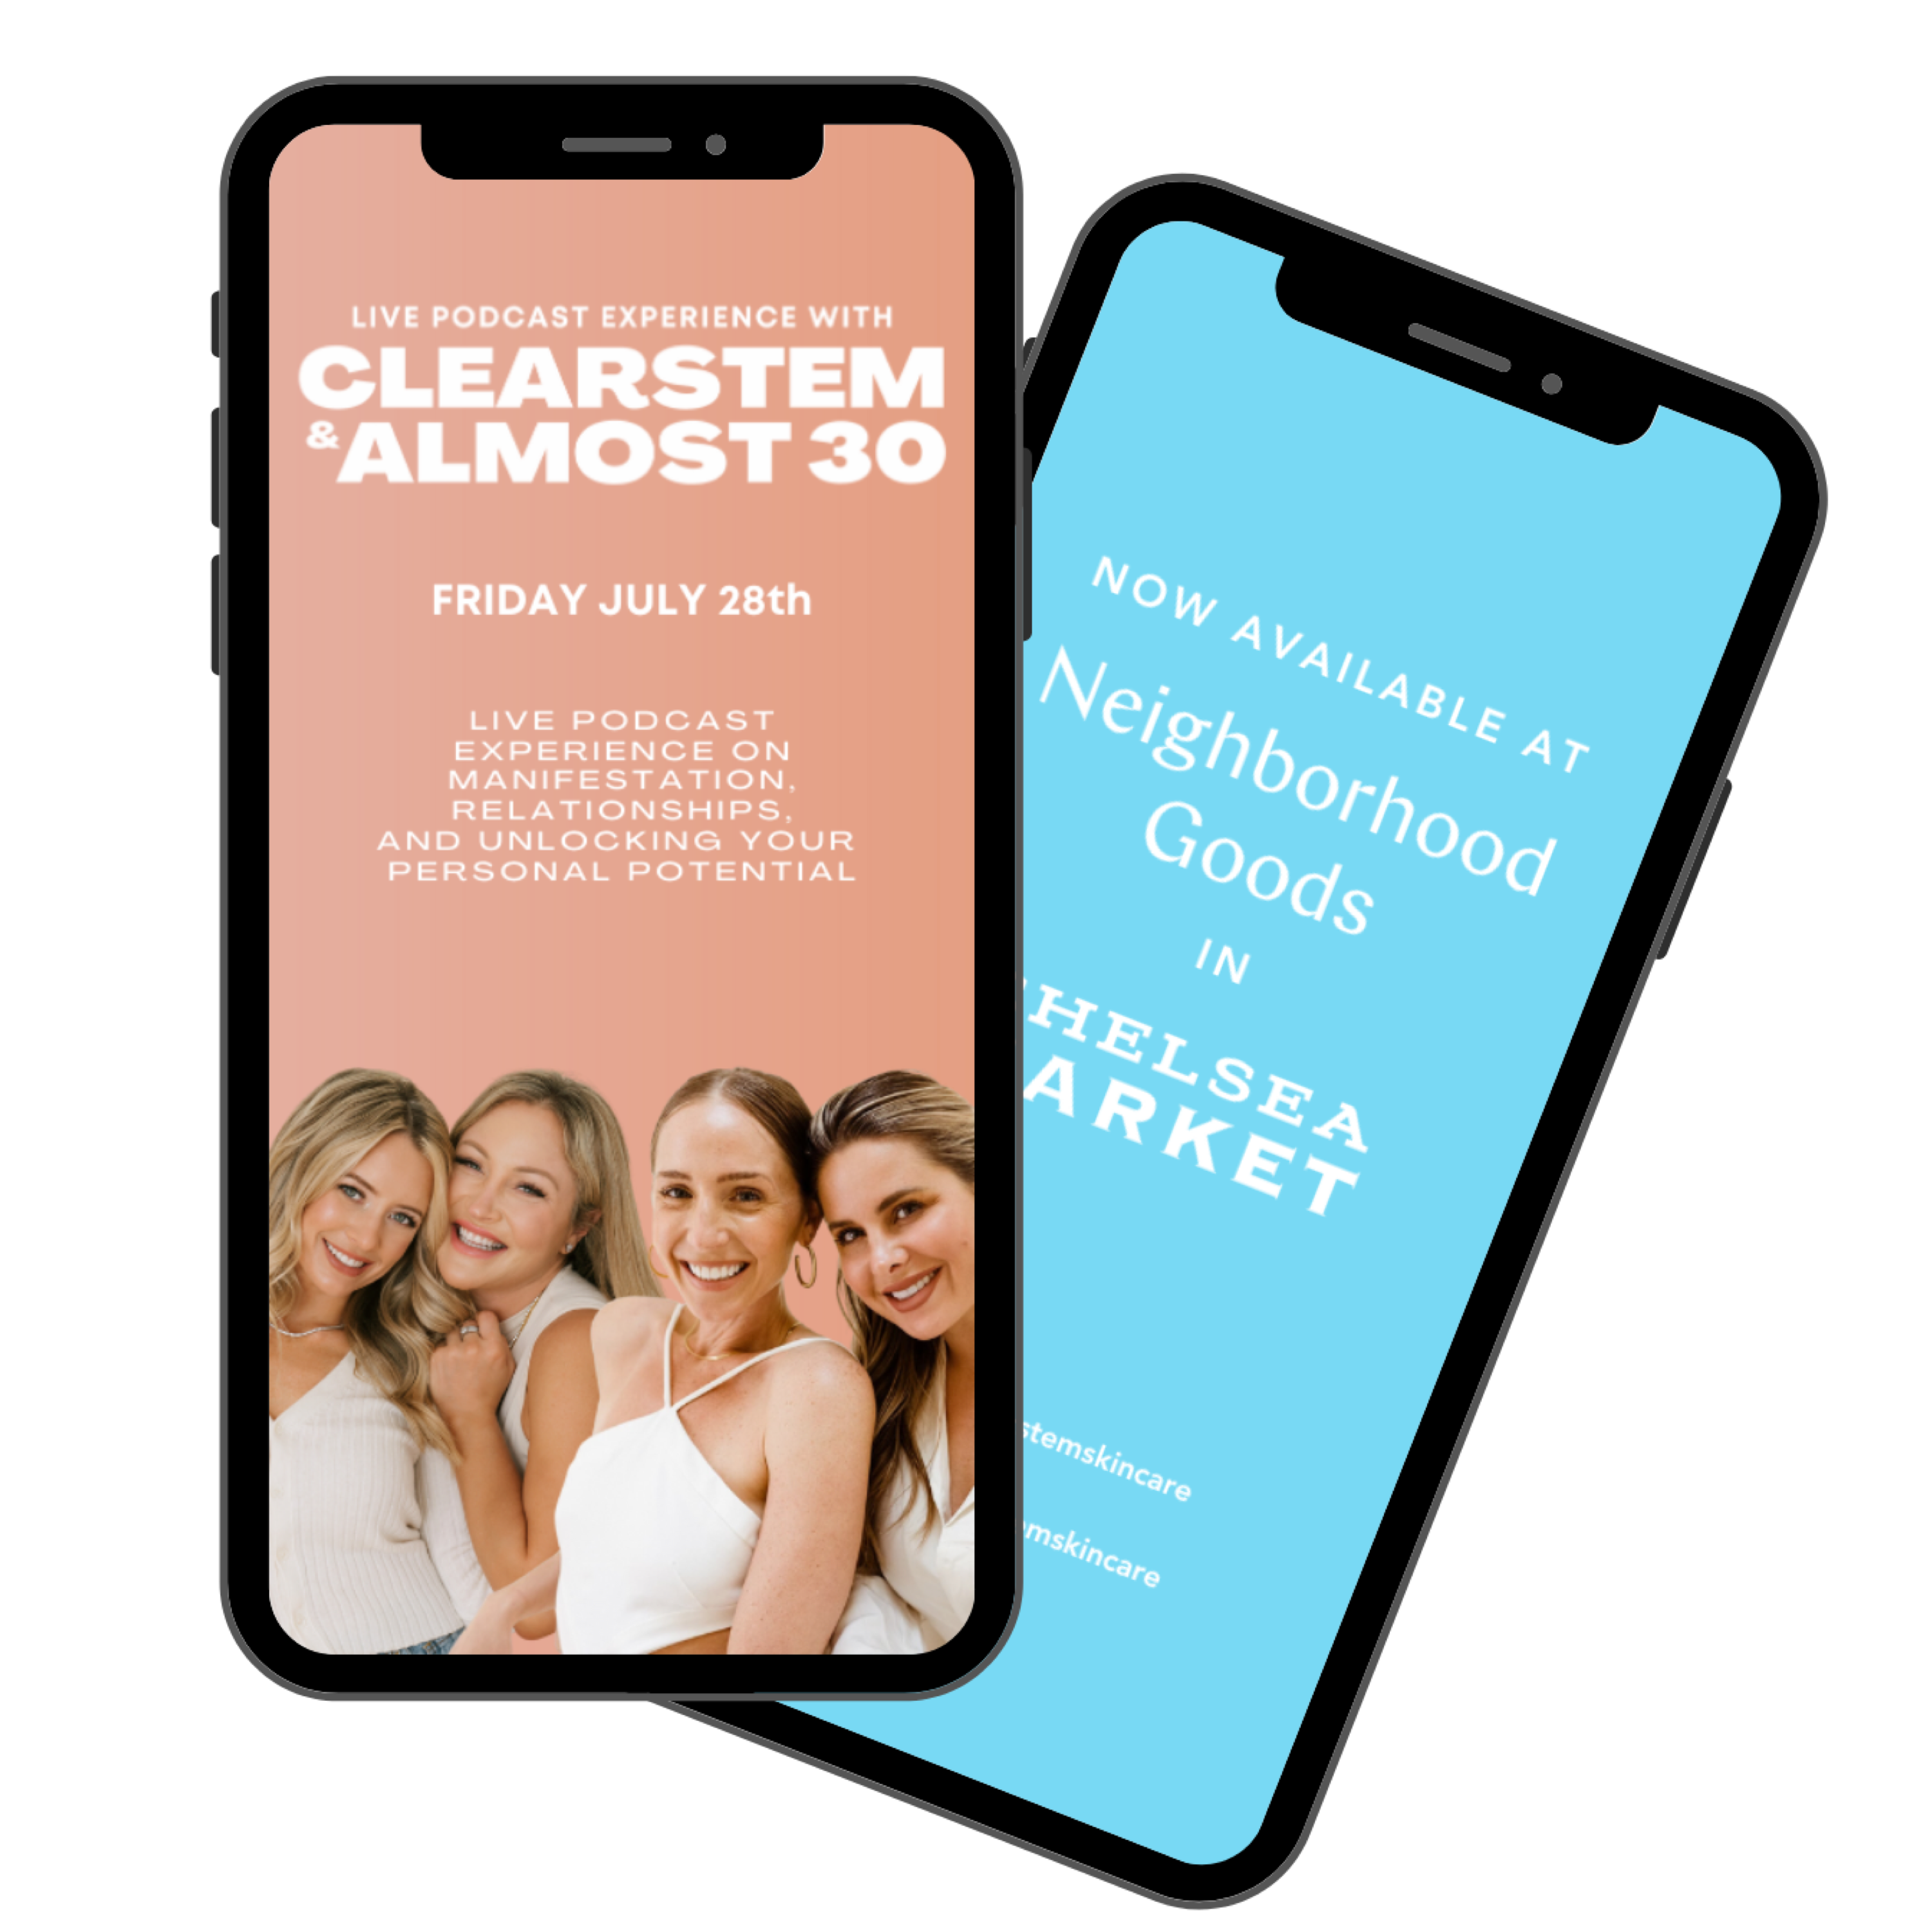 clearstem almost 30 podcast event nyc